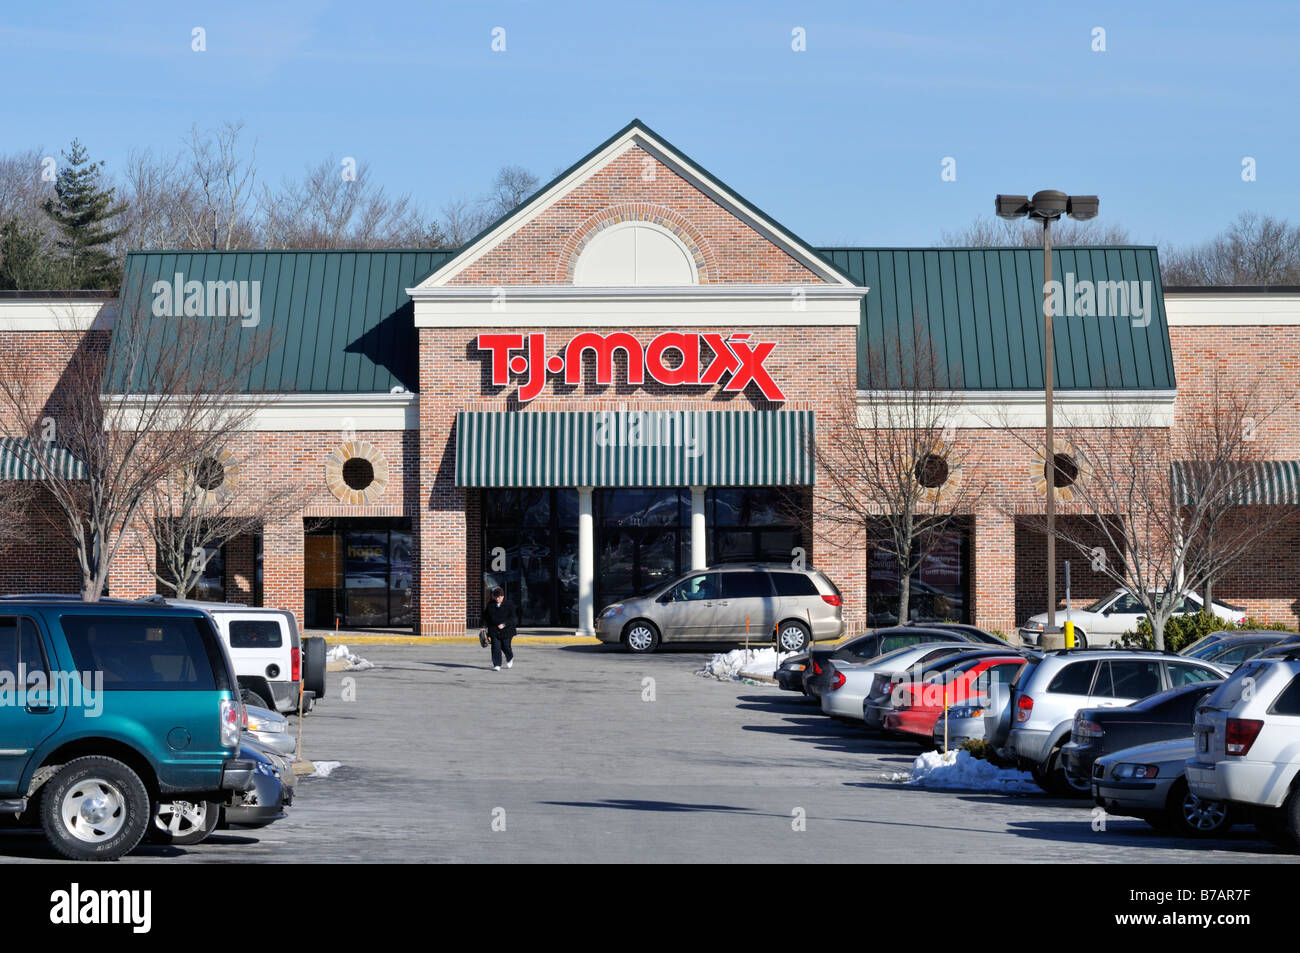 T J Maxx retail storefront with cars in parking lot in USA. Stock Photo